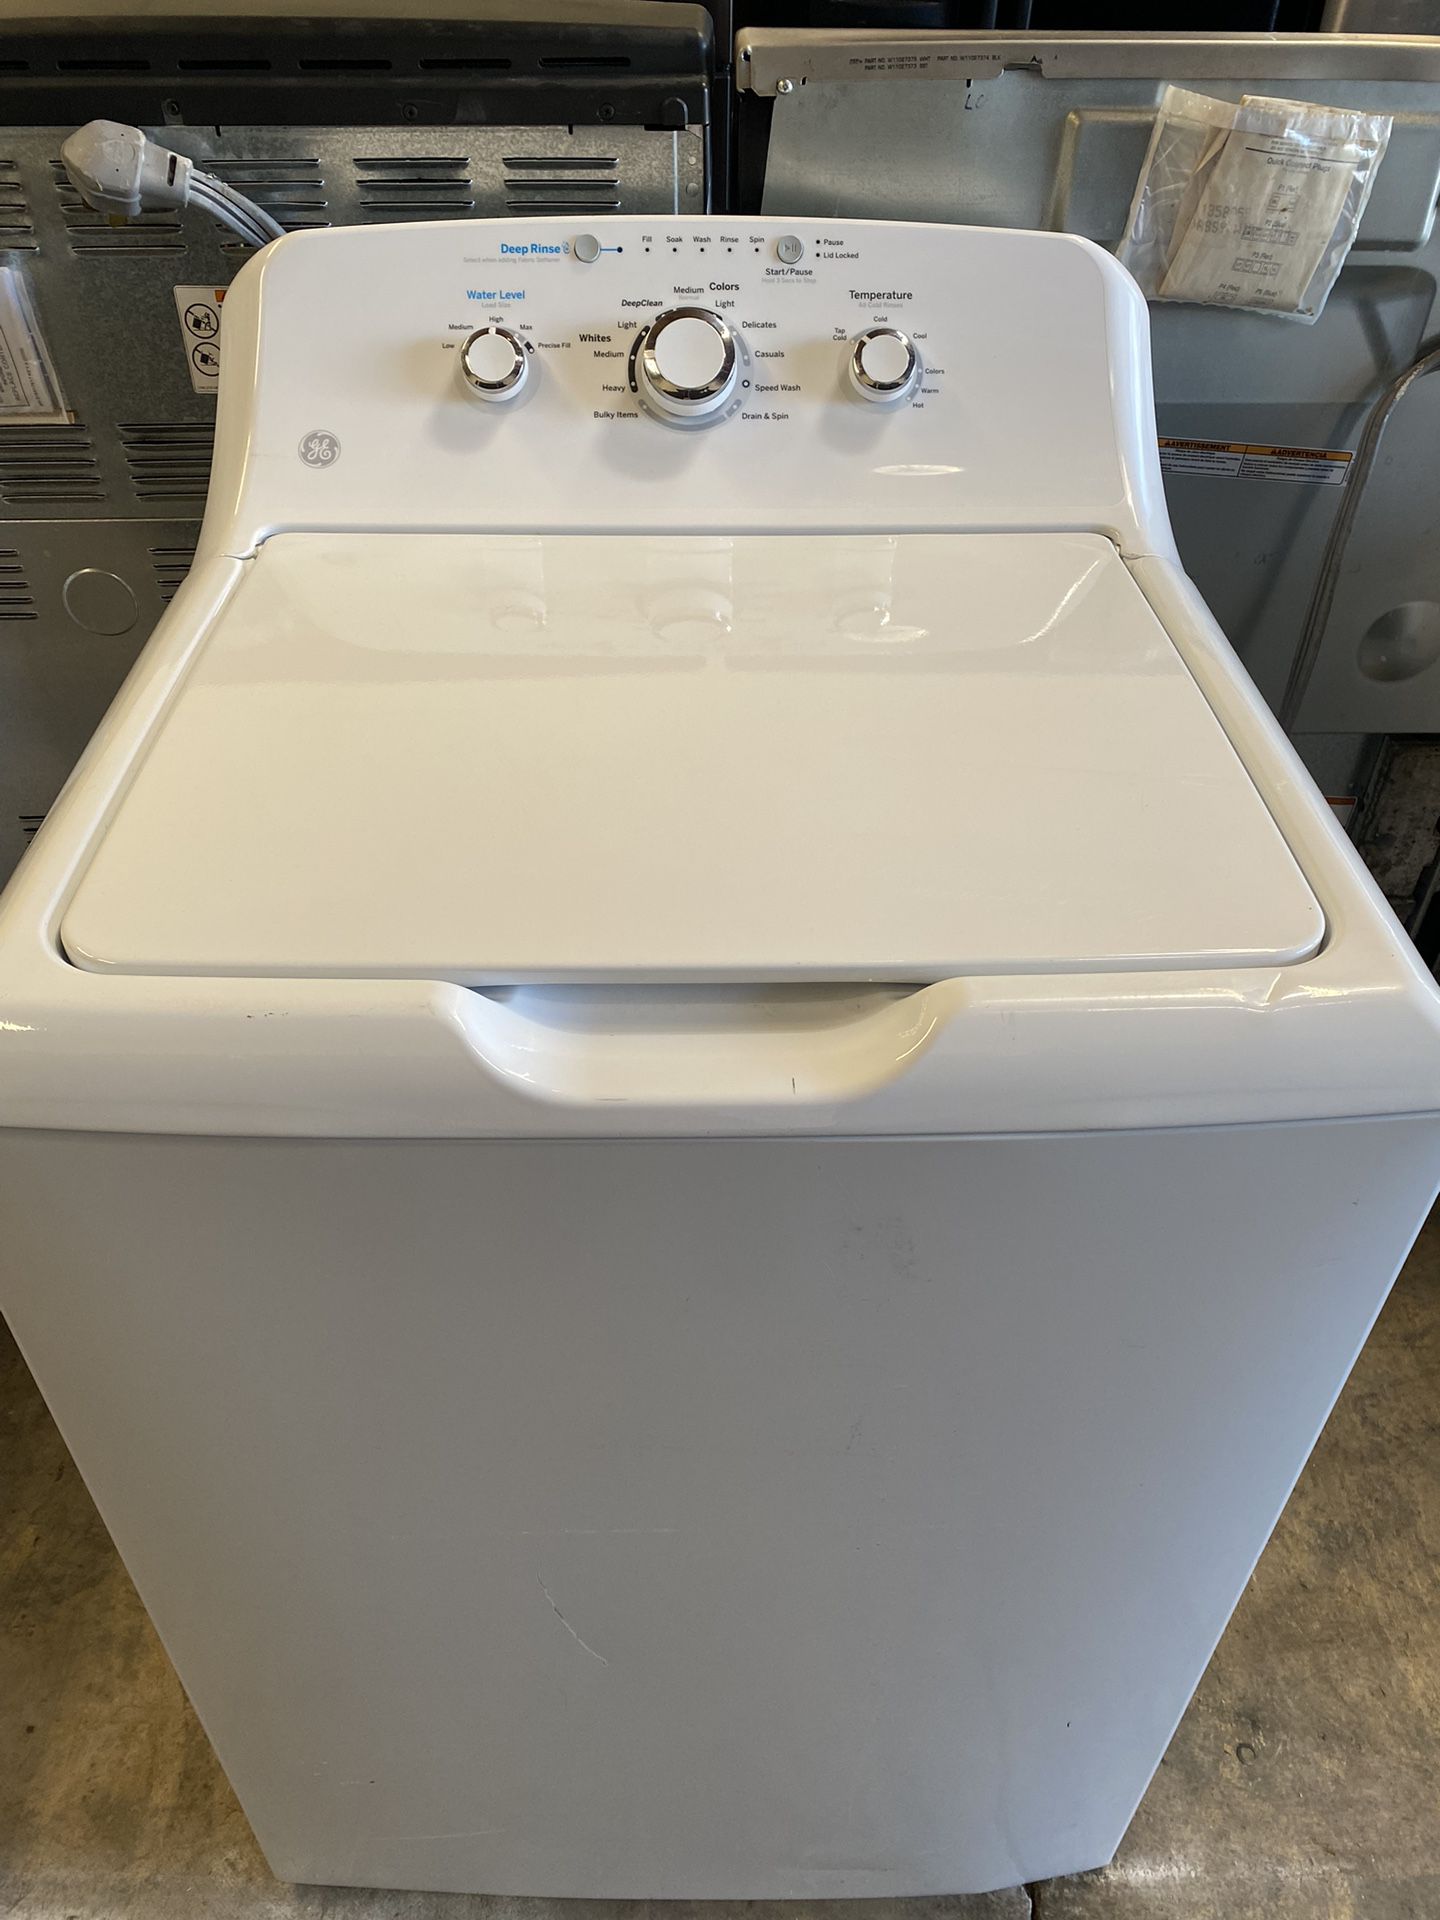 GE Washer Used Clean And Works Good Big Tub With Agitator